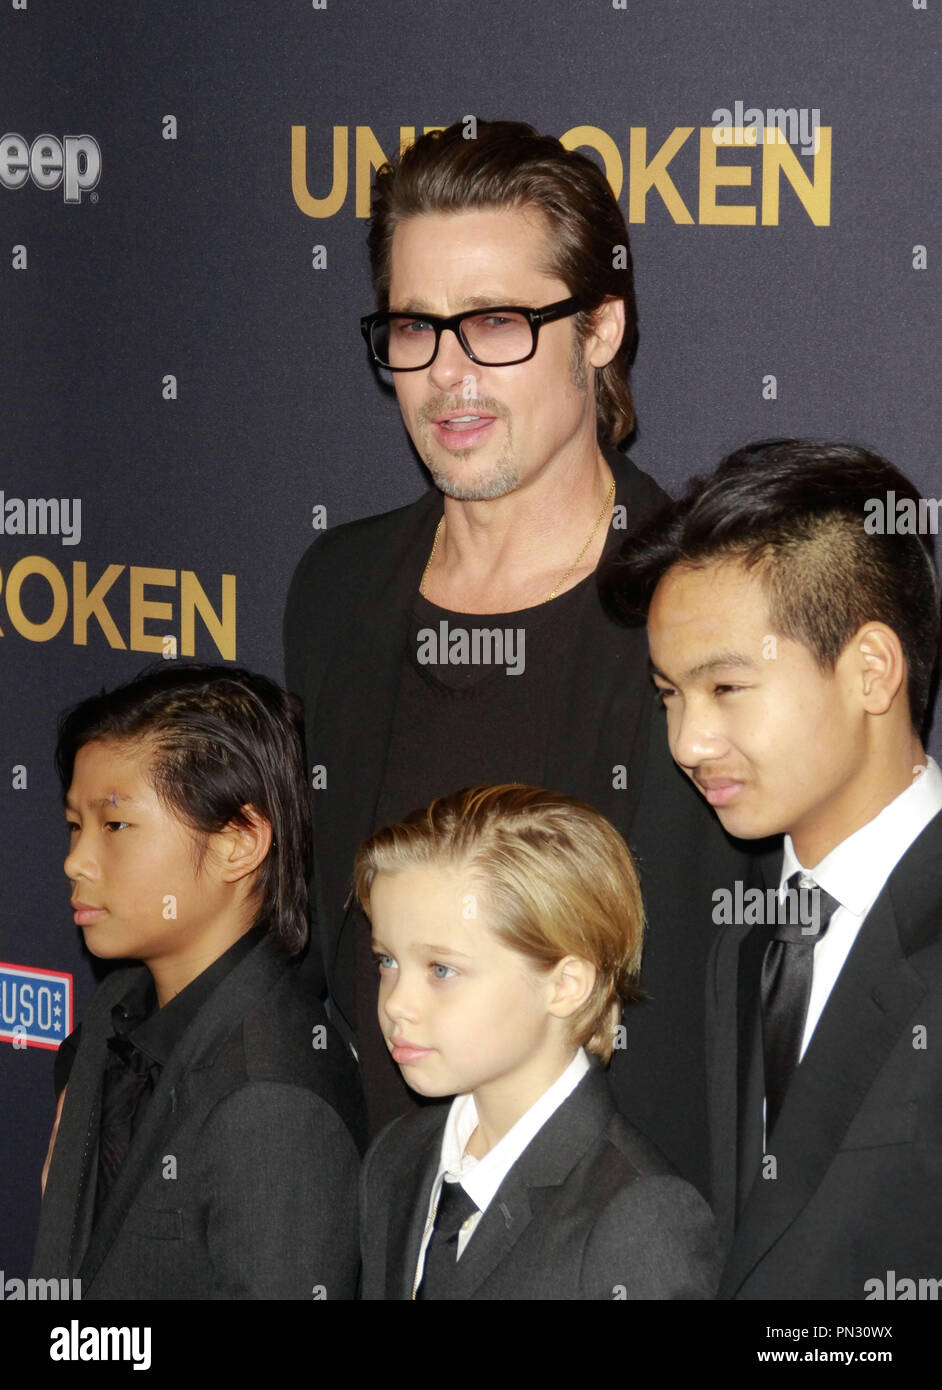 Pax Jolie-Pitt, Brad Pitt, Shiloh Jolie-Pitt and Maddox Jolie-Pi at the Universal Pictures' premiere of 'Unbroken' held at Dolby Theatre in Hollywood, CA, December15, 2014. Photo by Joe Martinez / PictureLux Stock Photo